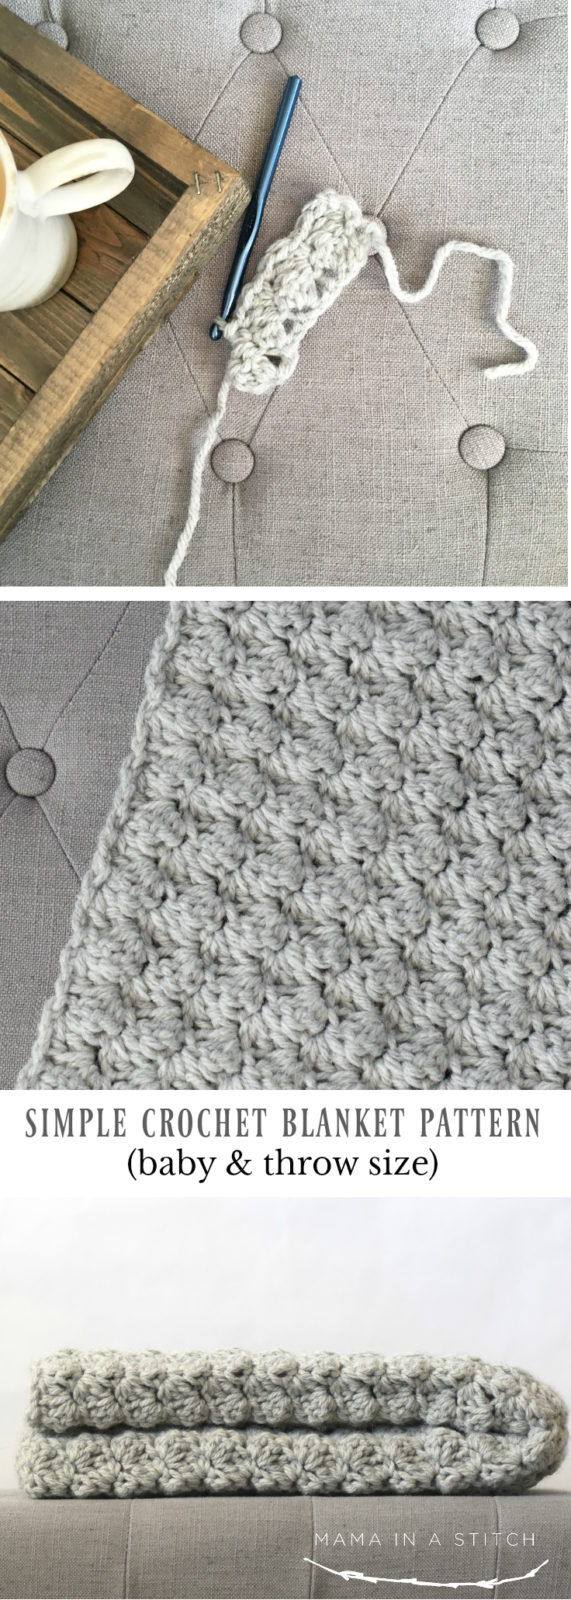 Free Afghan Stitch Crochet Patterns Simple Crocheted Blanket Go To Pattern Mama In A Stitch